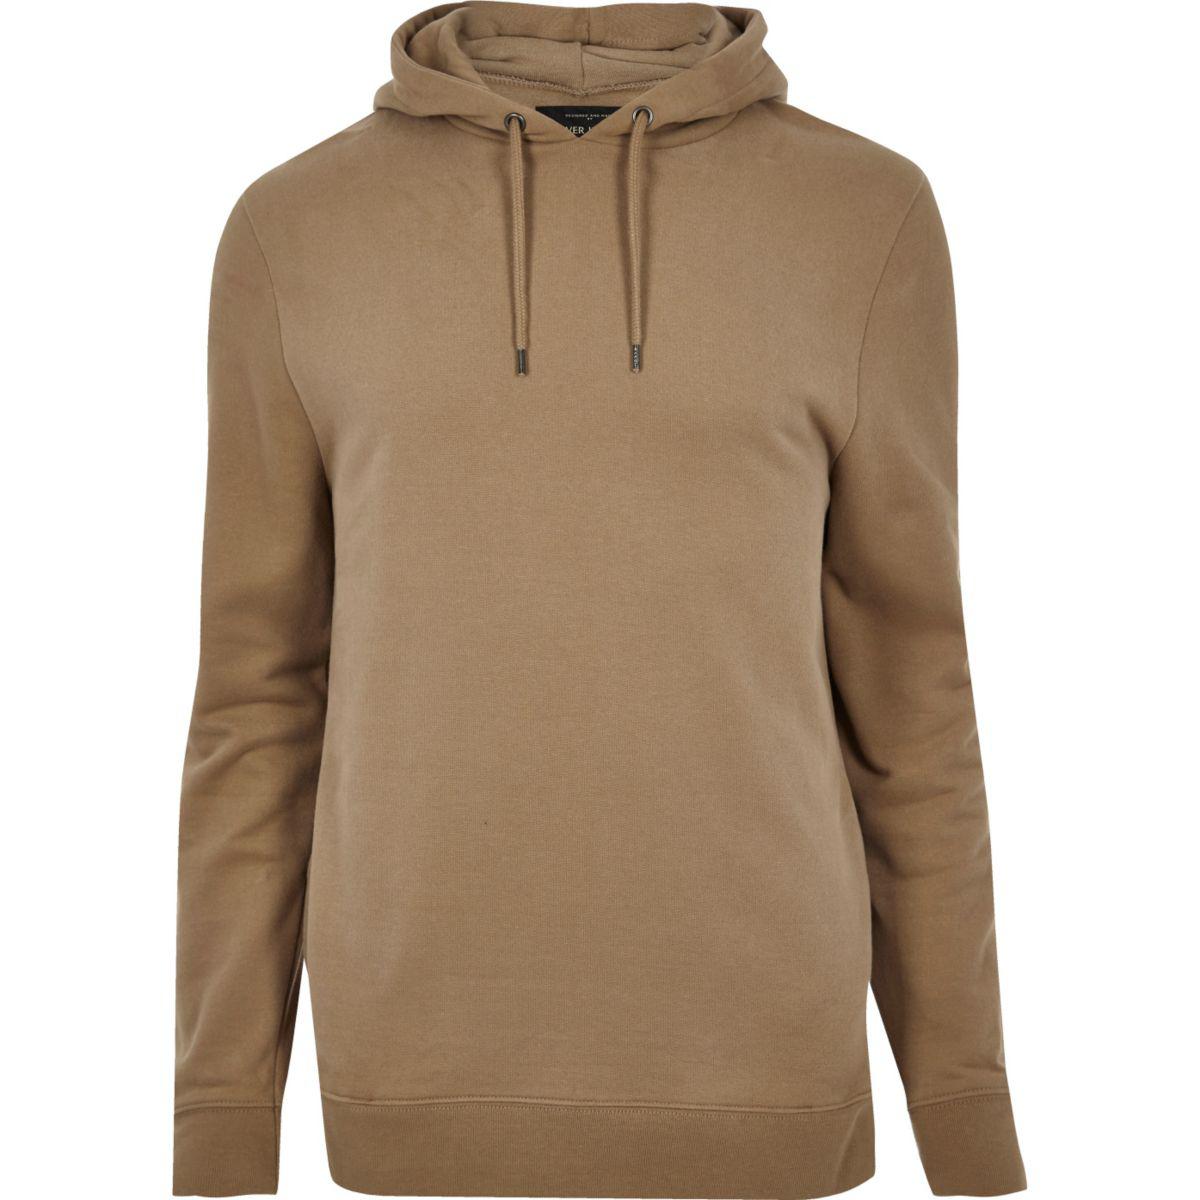 Lyst - River Island Light Brown Soft Hoodie in Brown for Men